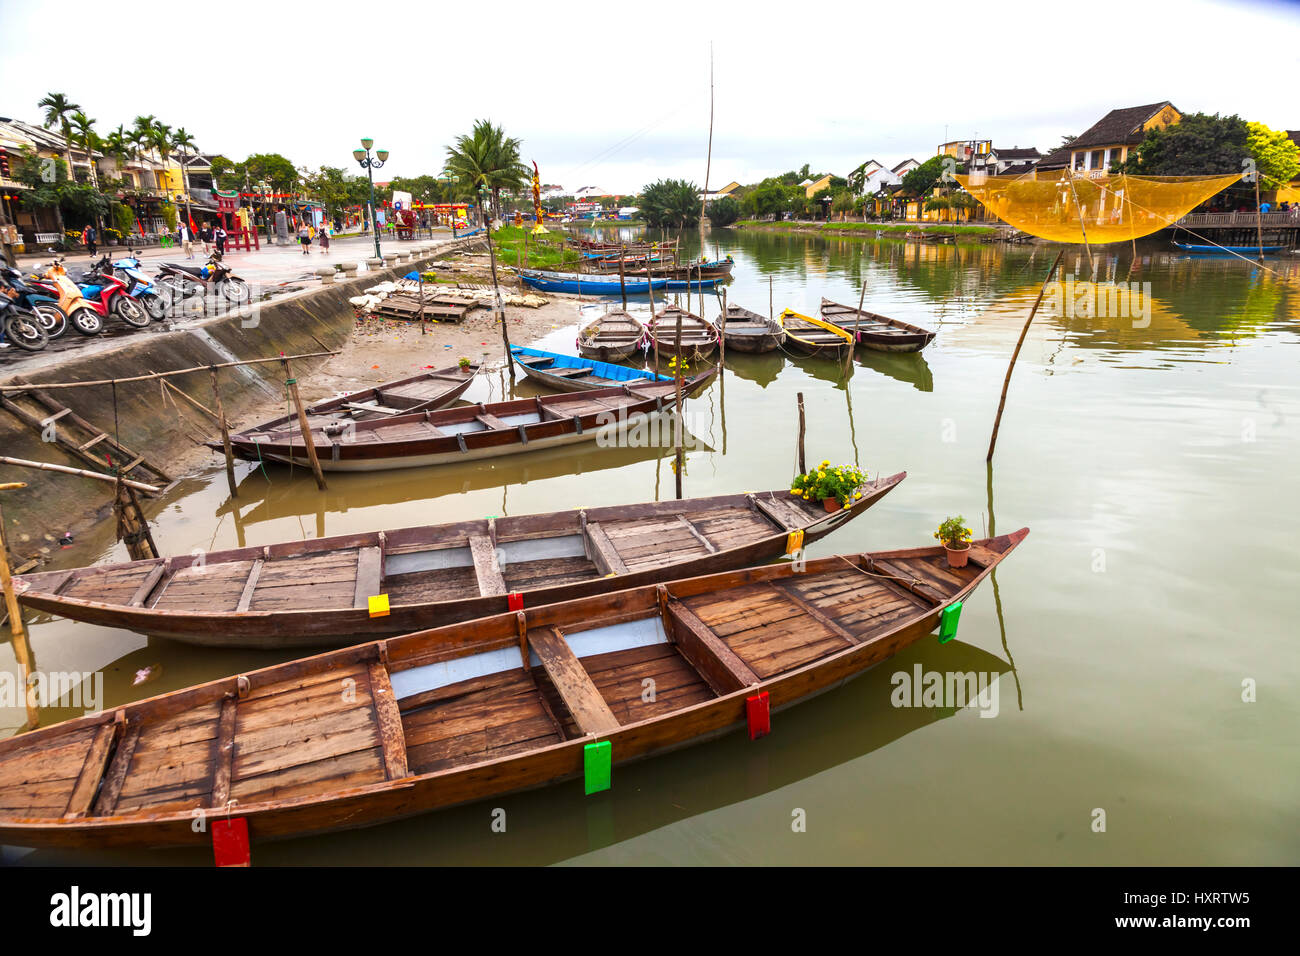 Boats line the canal in Hoi An in Vietnam Stock Photo